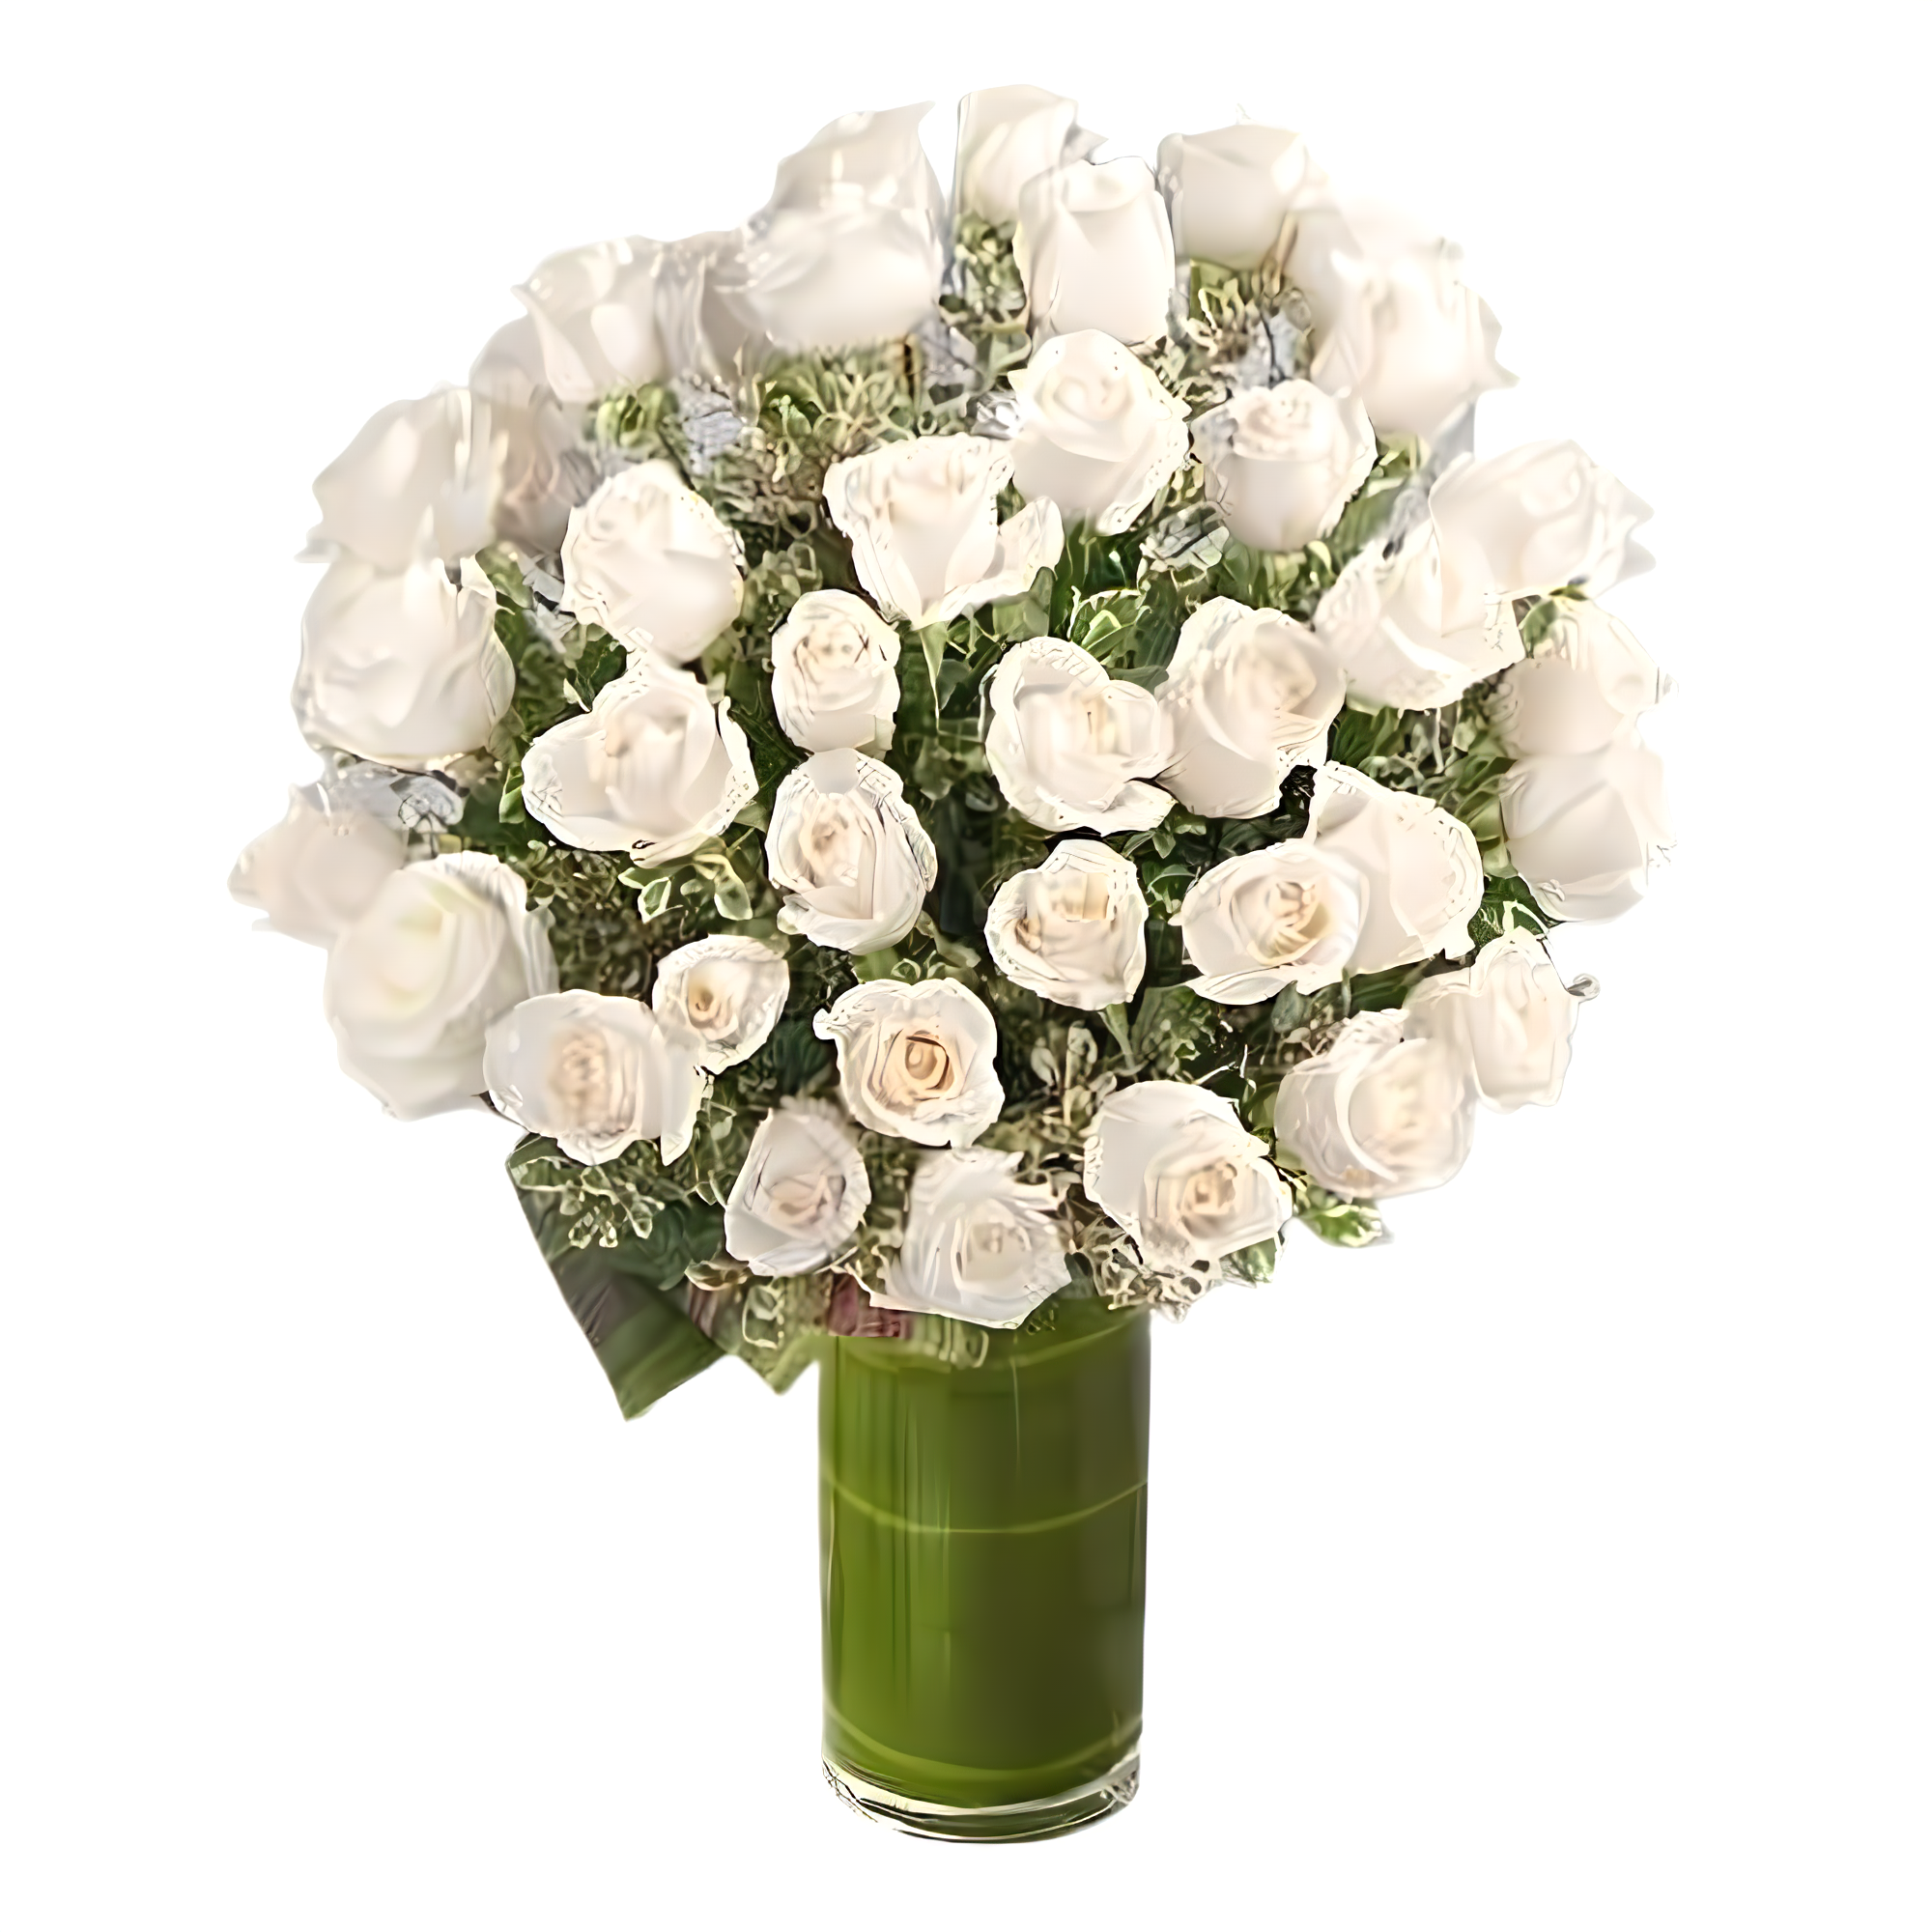 Manhattan Flower Delivery - Luxury Rose Bouquet - 48 Premium White Long-Stem Roses - Products > Luxury Collection